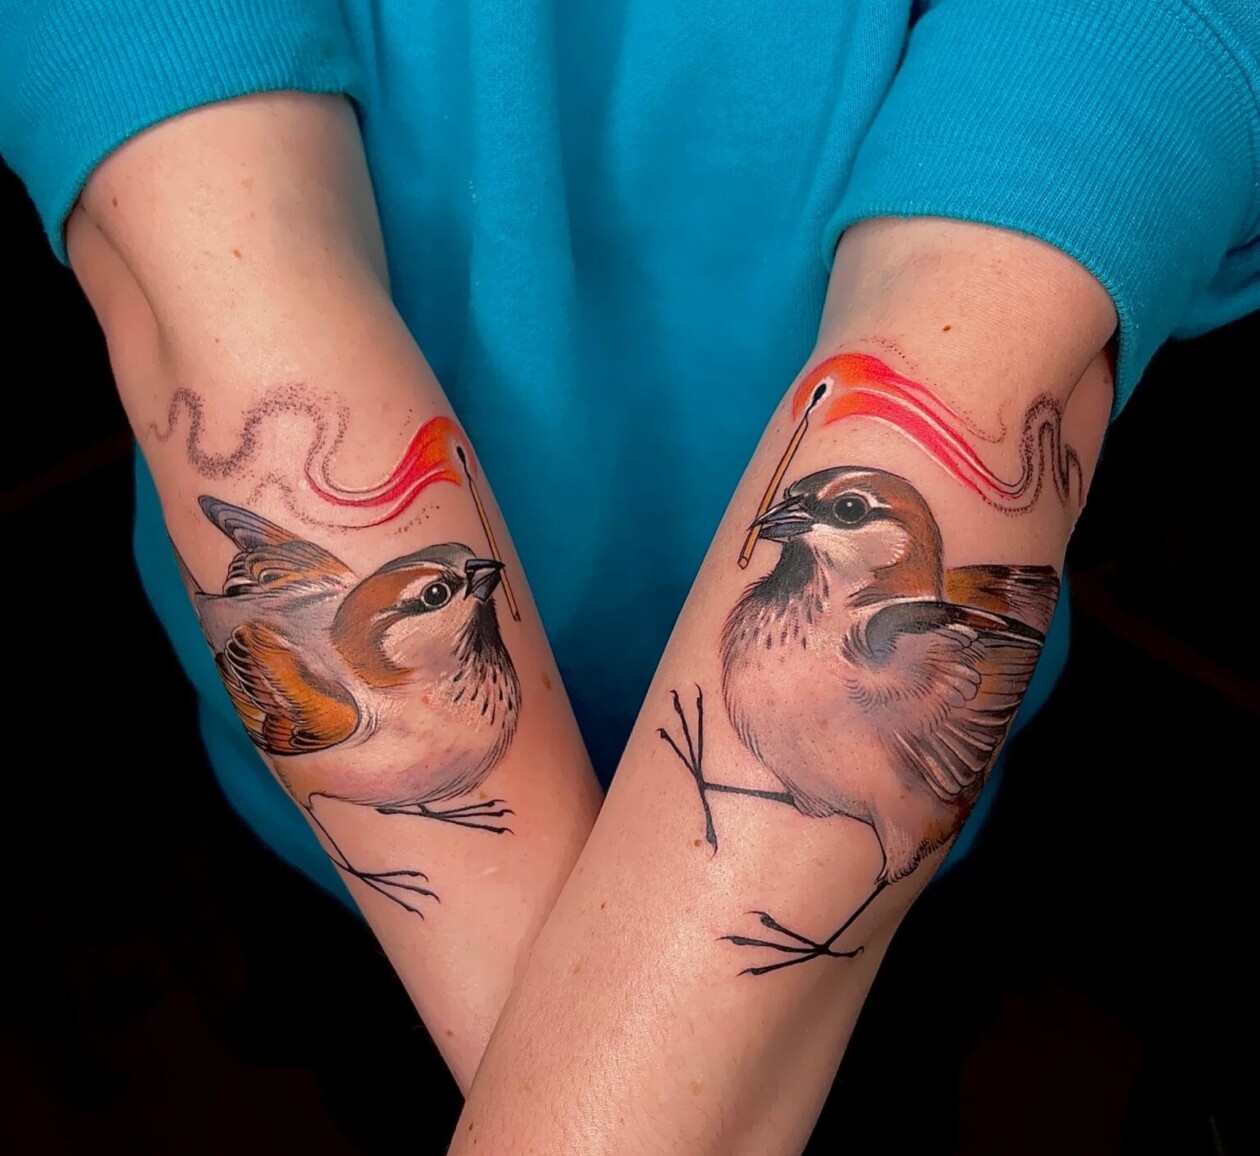 Stephanie Brown Creates Whimsical Tattoos Of Birds Holding A Lit Match Symbolizing Hope For A Better Future (3)